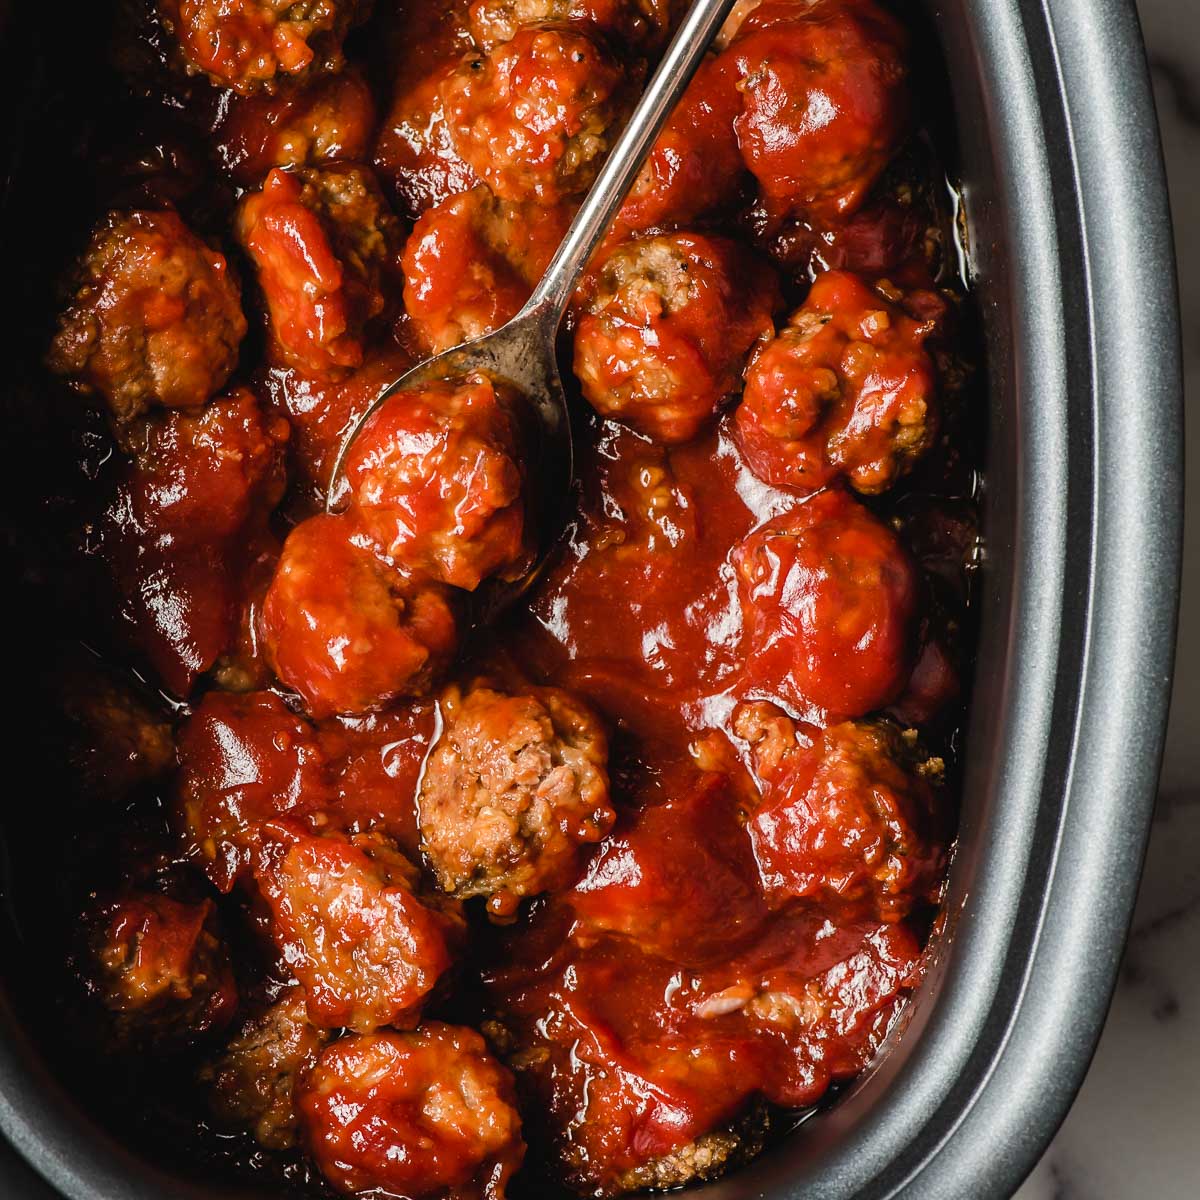 BBQ Meatballs for a party shown in a crock pot with a metal spoon.